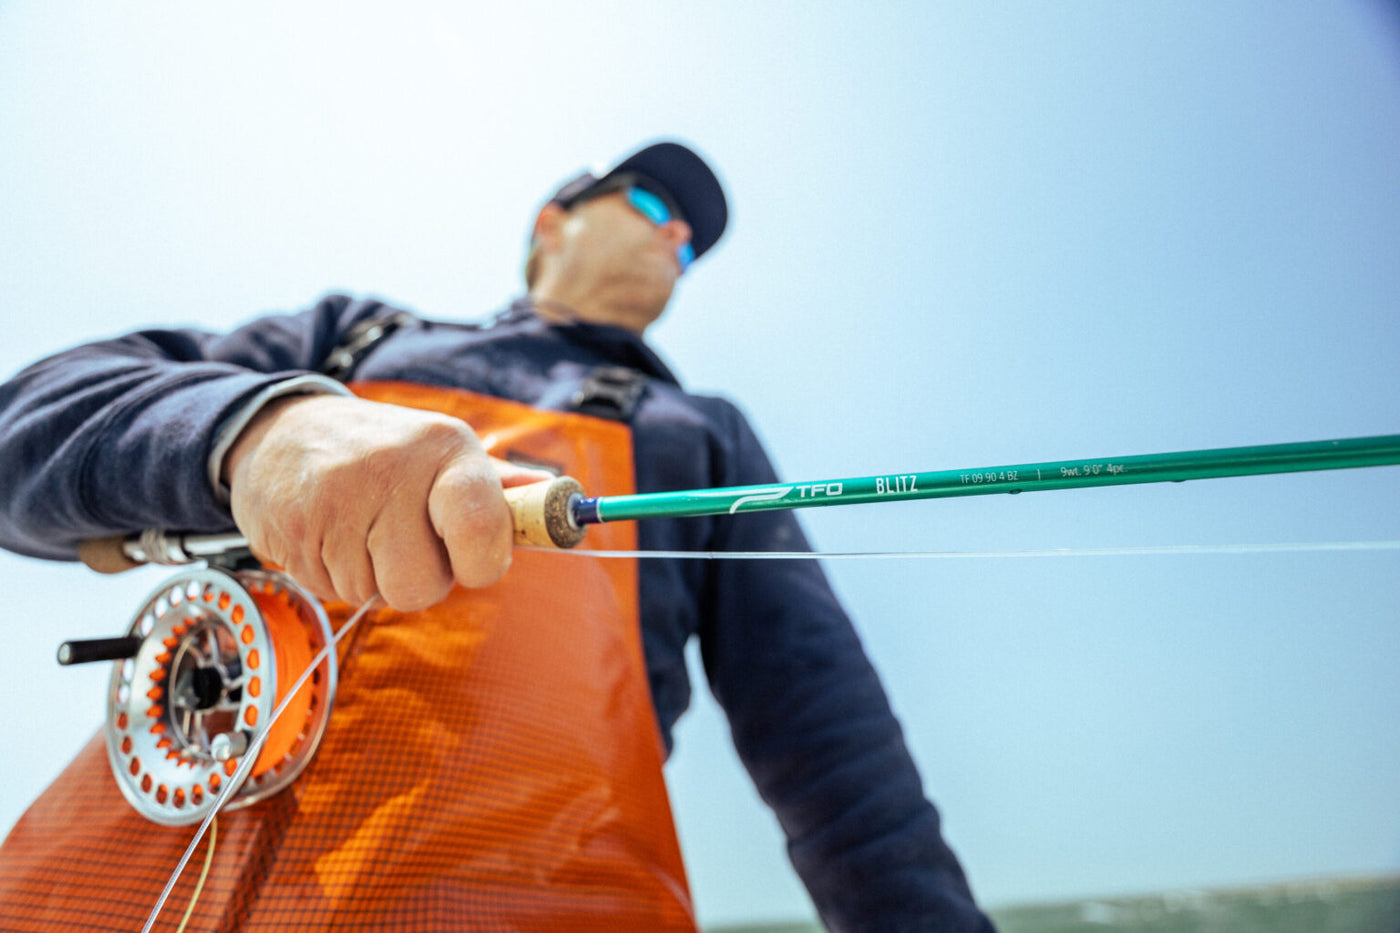 Salomone: Benefits of a 4-weight fly rod